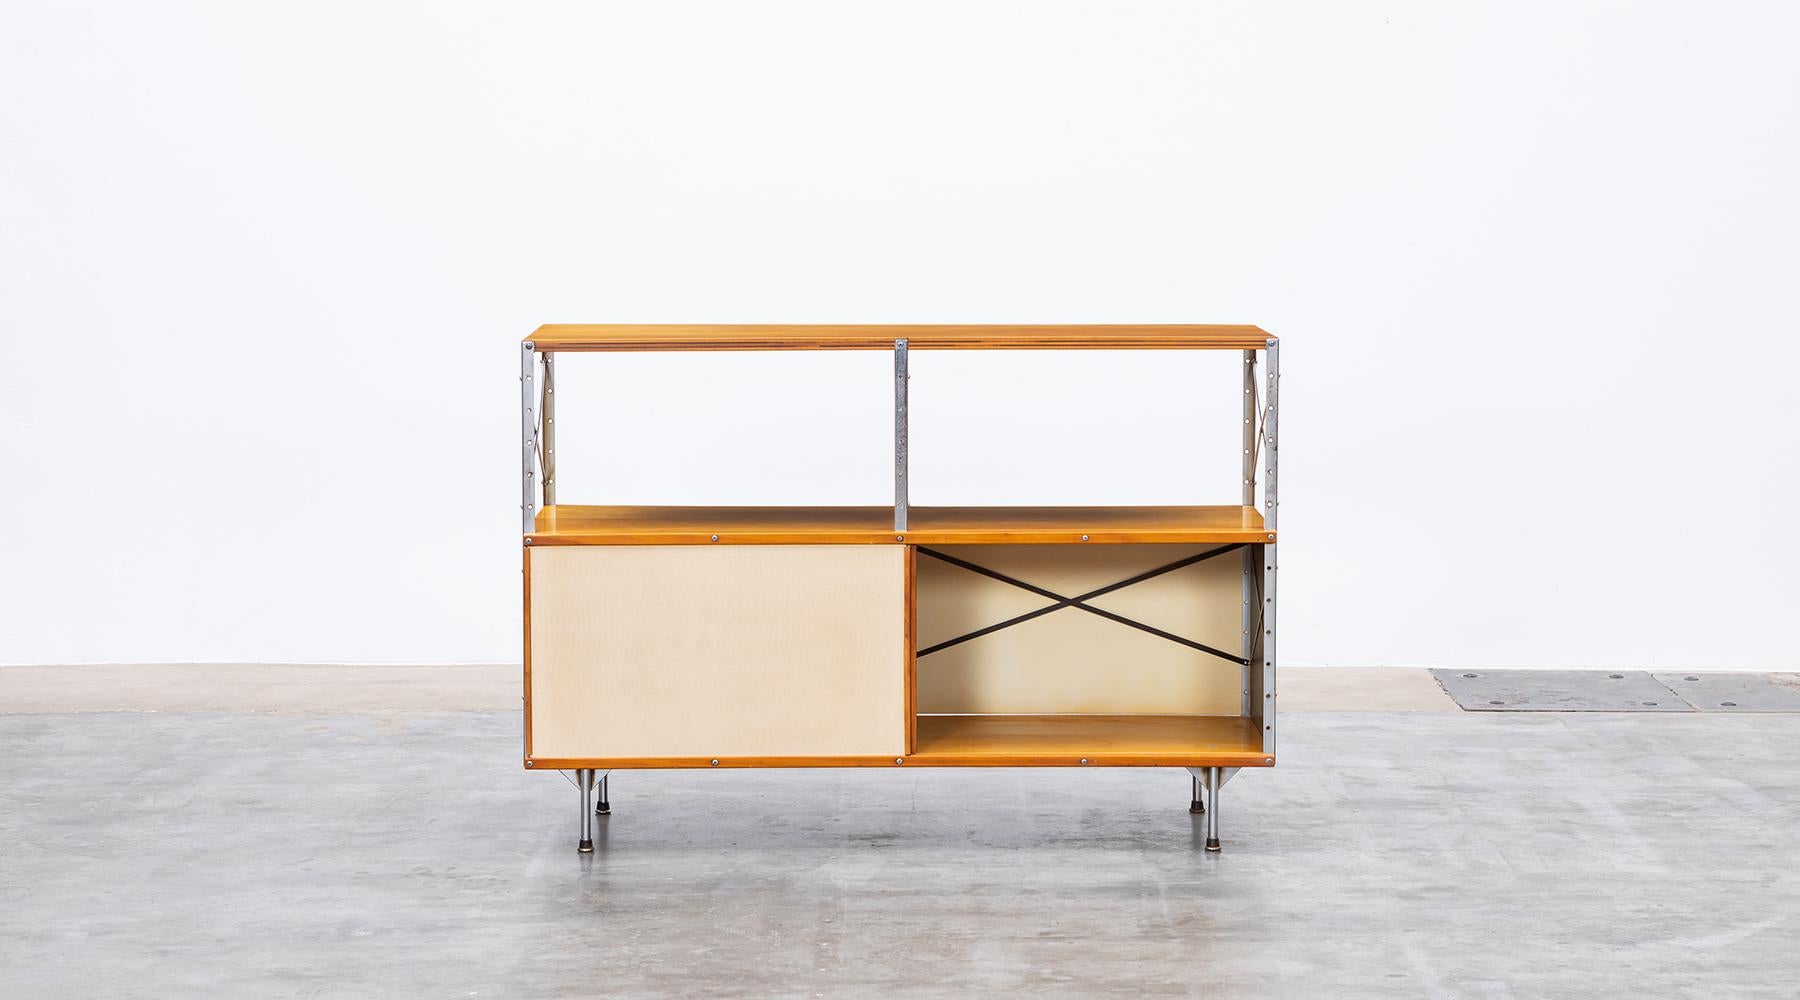 Charles and Ray Eames storage unit featuring an open area in the upper section and two sliding doors in fiberglass in the lower section. The basic colour consists of beige, a red part at the back and a black piece at the side.The shelf comes in good